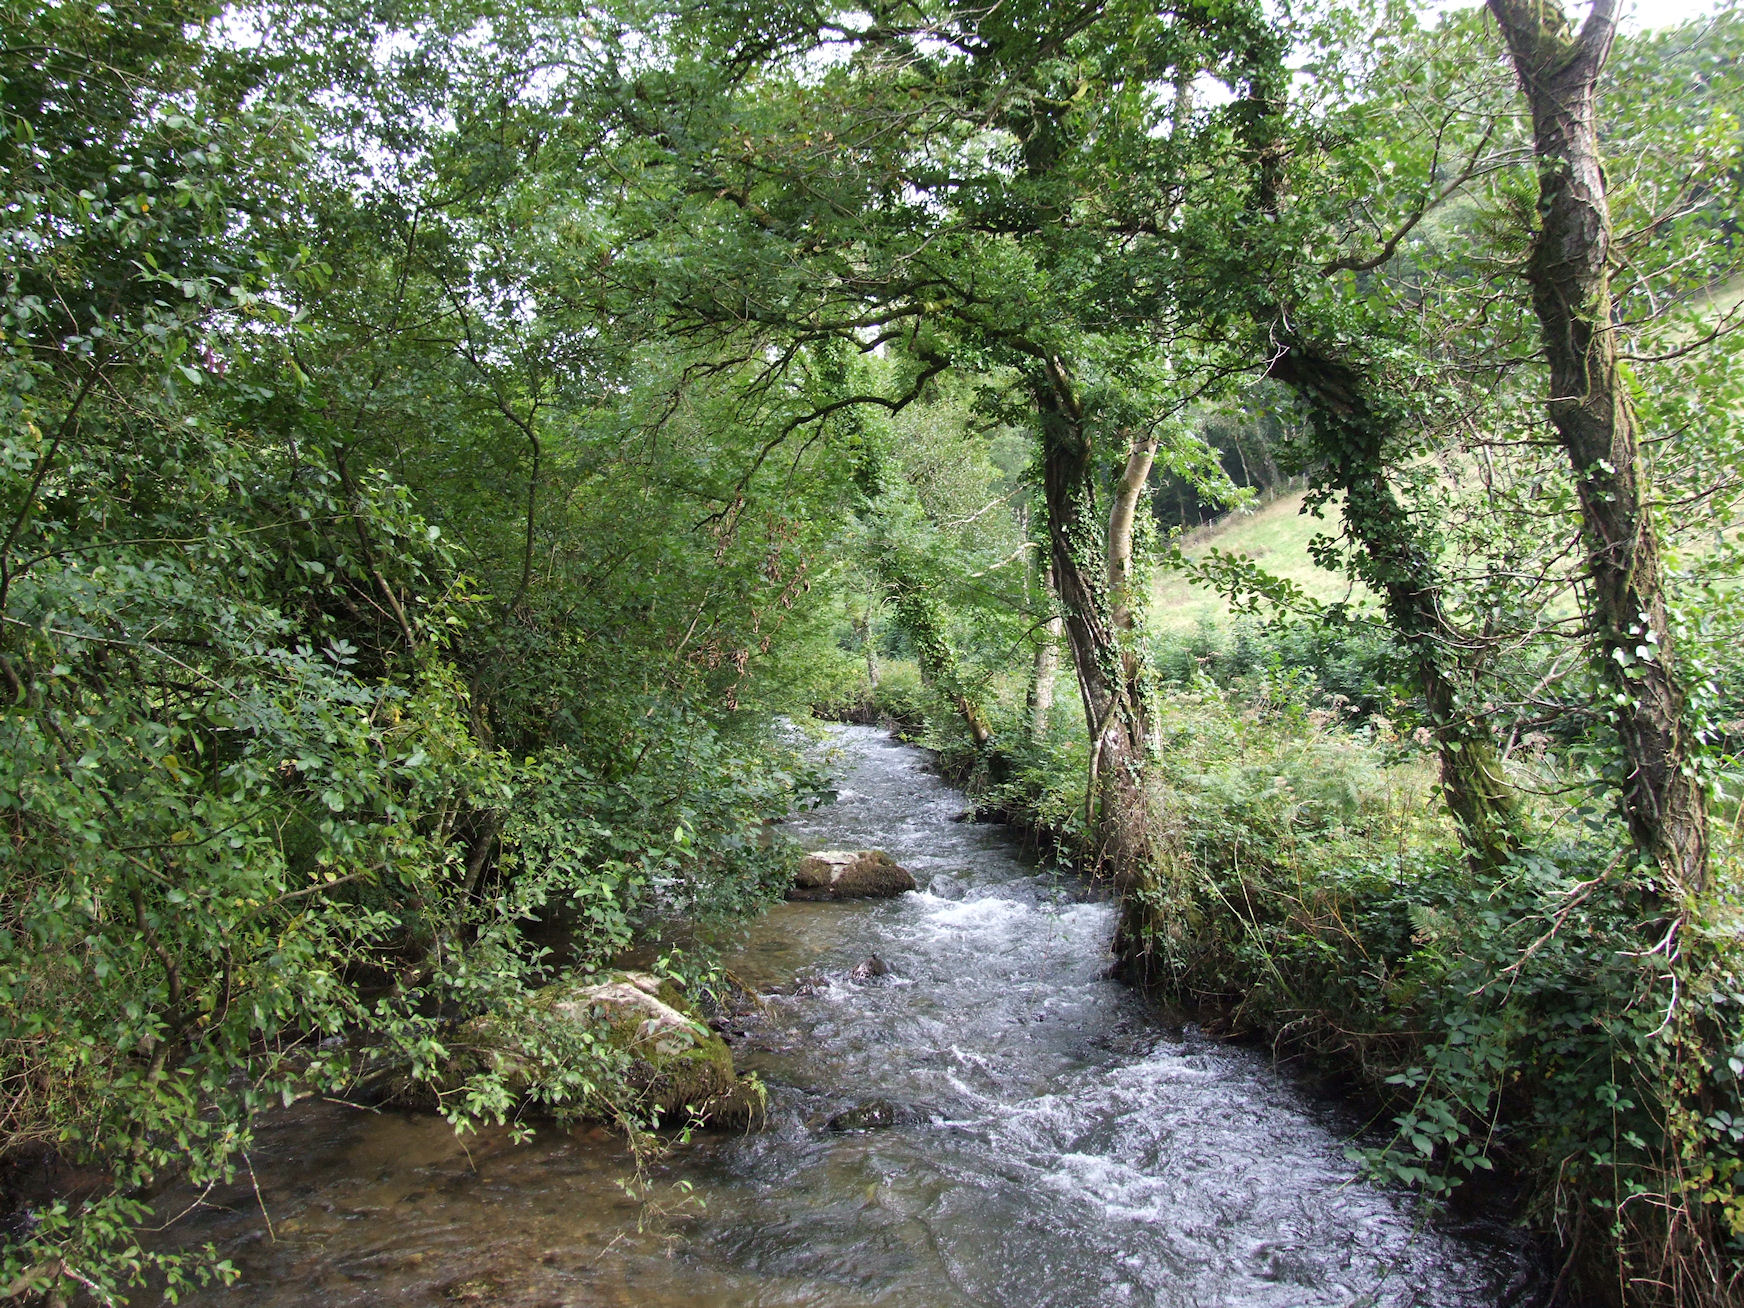 a flowing stream surrounded by green trees and bushes